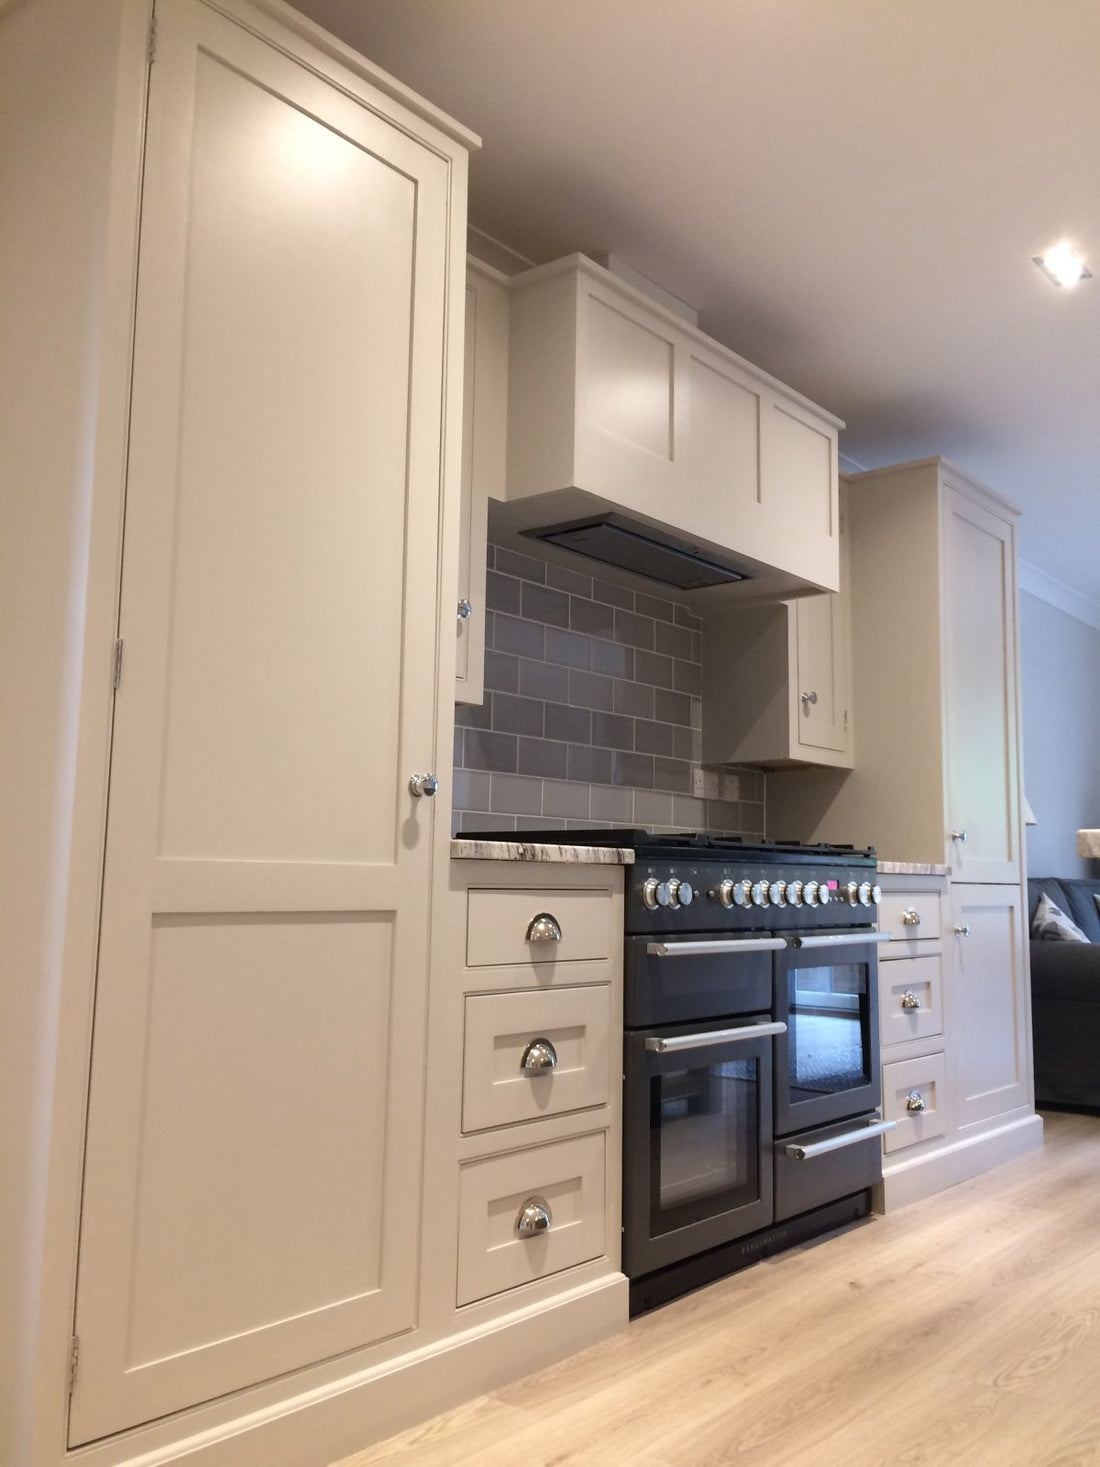 Choosing the right Extractor for your Kitchen - The Painted Kitchen Company Ltd